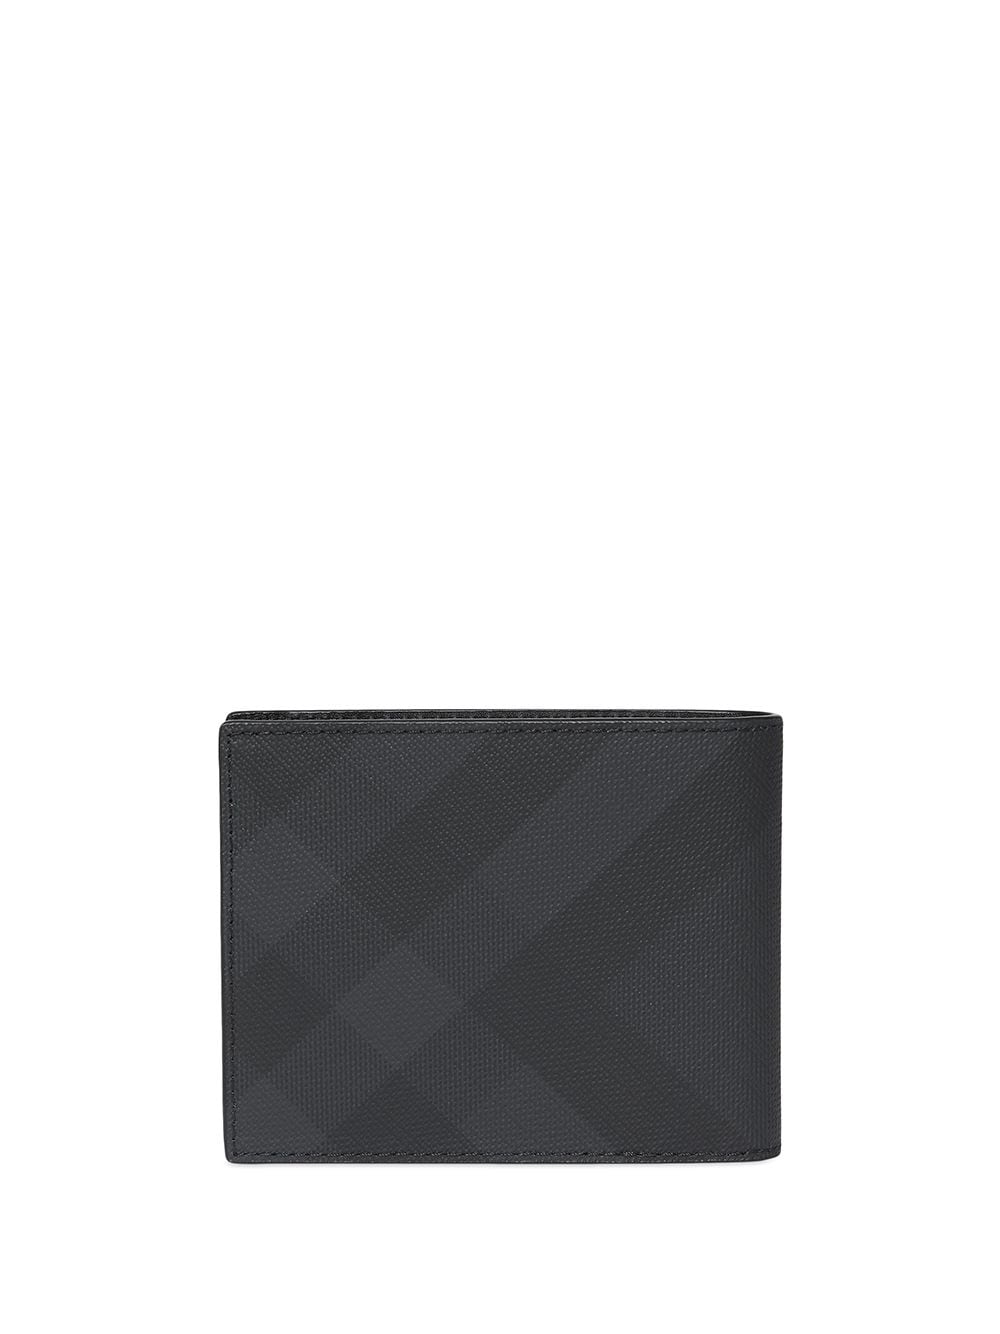 Burberry London Check And Leather Bifold Wallet - Farfetch